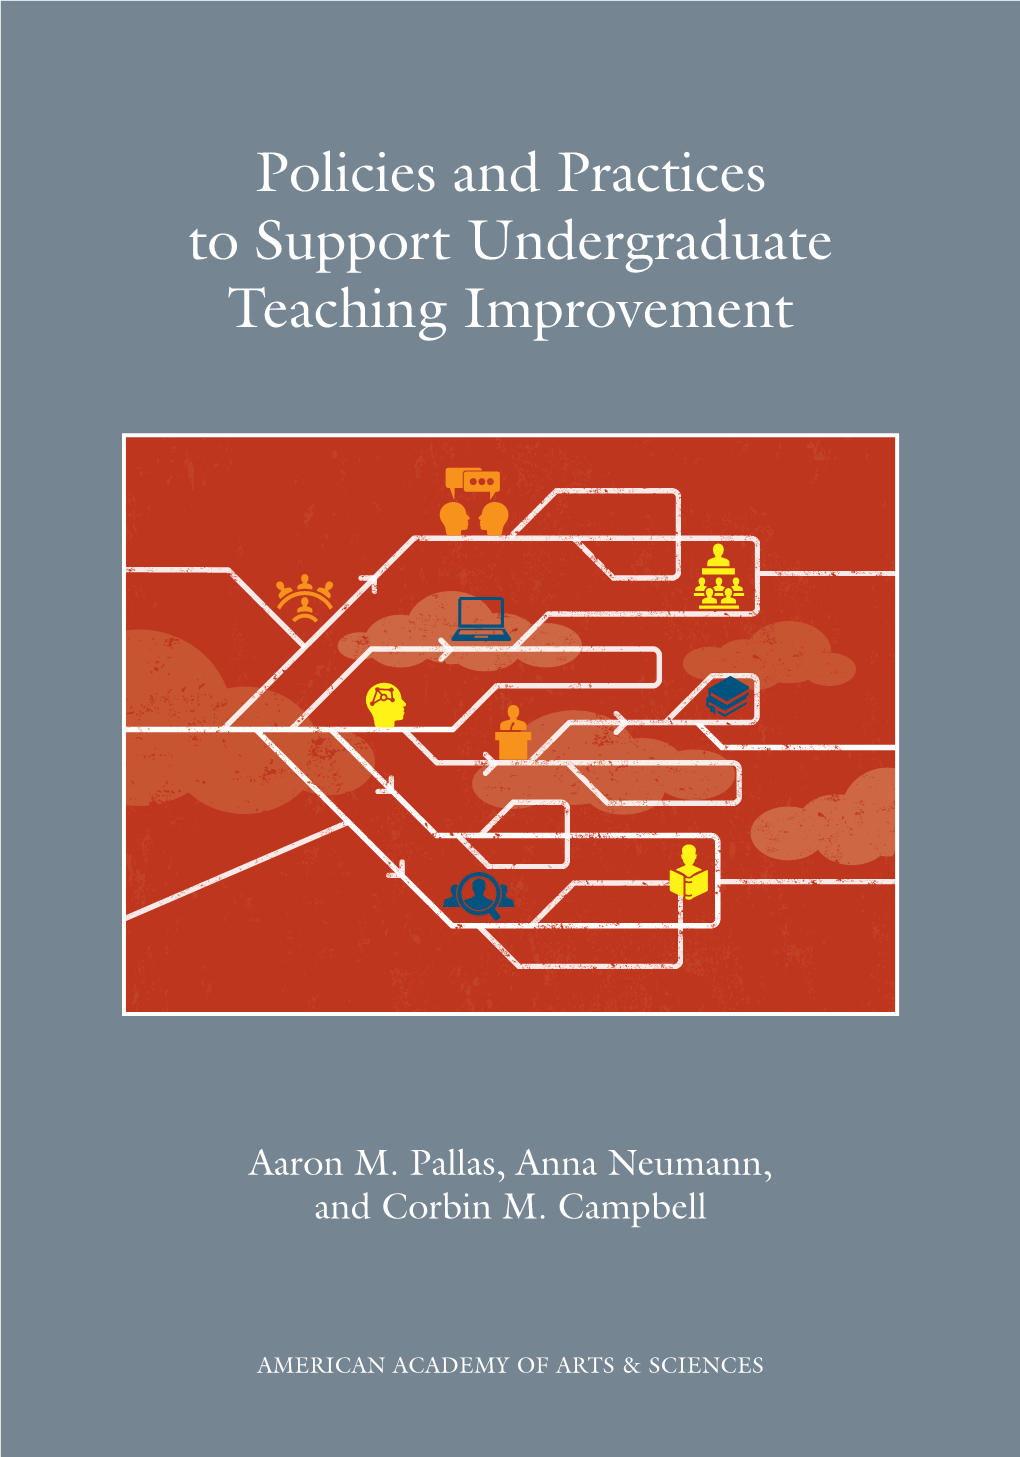 Policies and Practices to Support Undergraduate Teaching Improvement